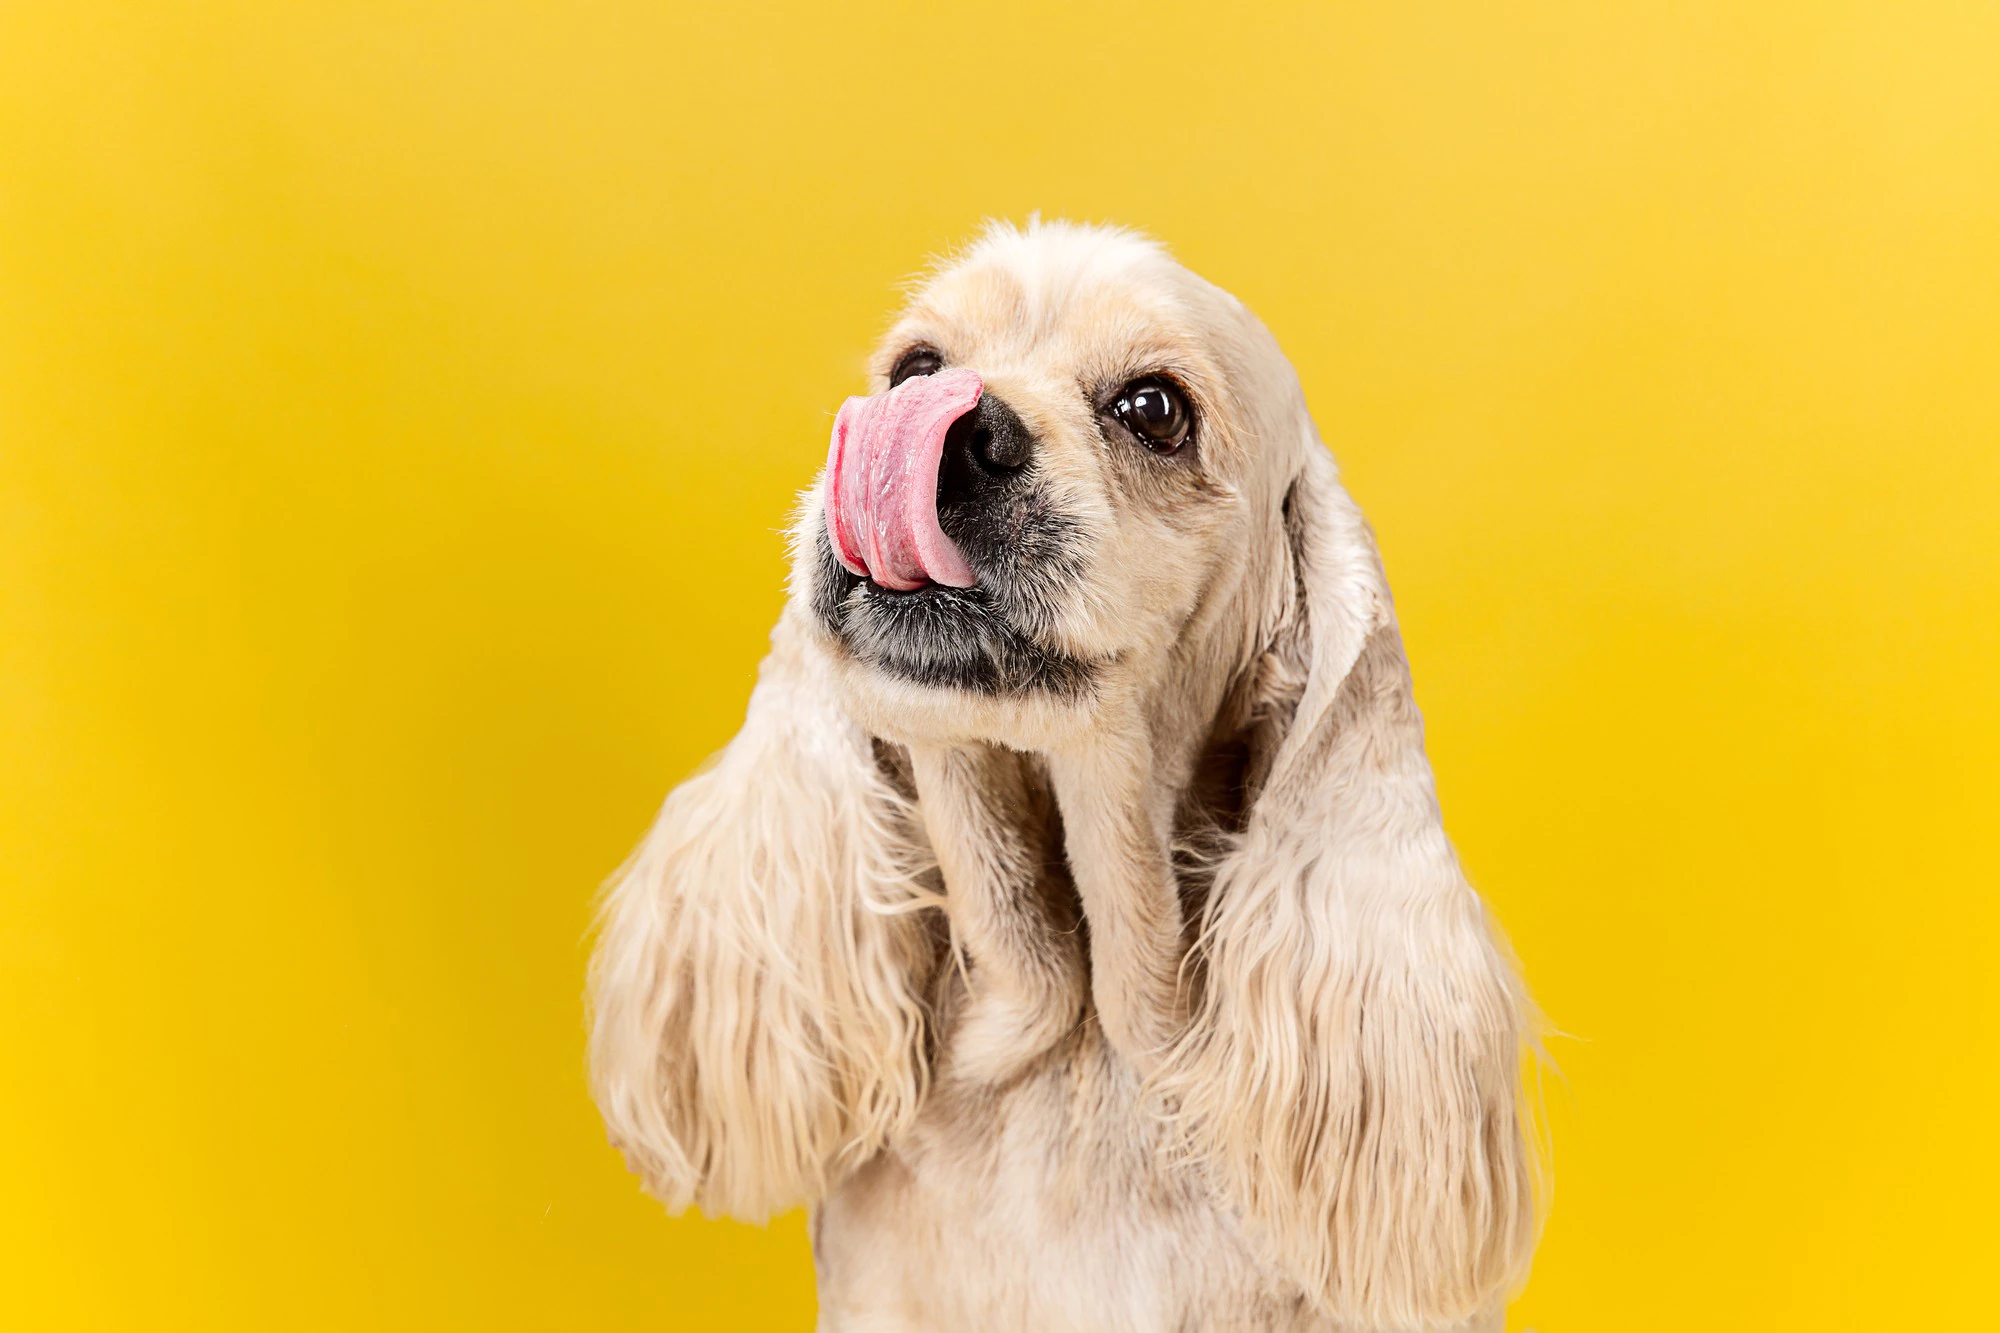 eyes full joy american spaniel puppy cute groomed fluffy doggy pet is sitting isolated yellow background studio photoshot negative space insert your text image 155003 34612